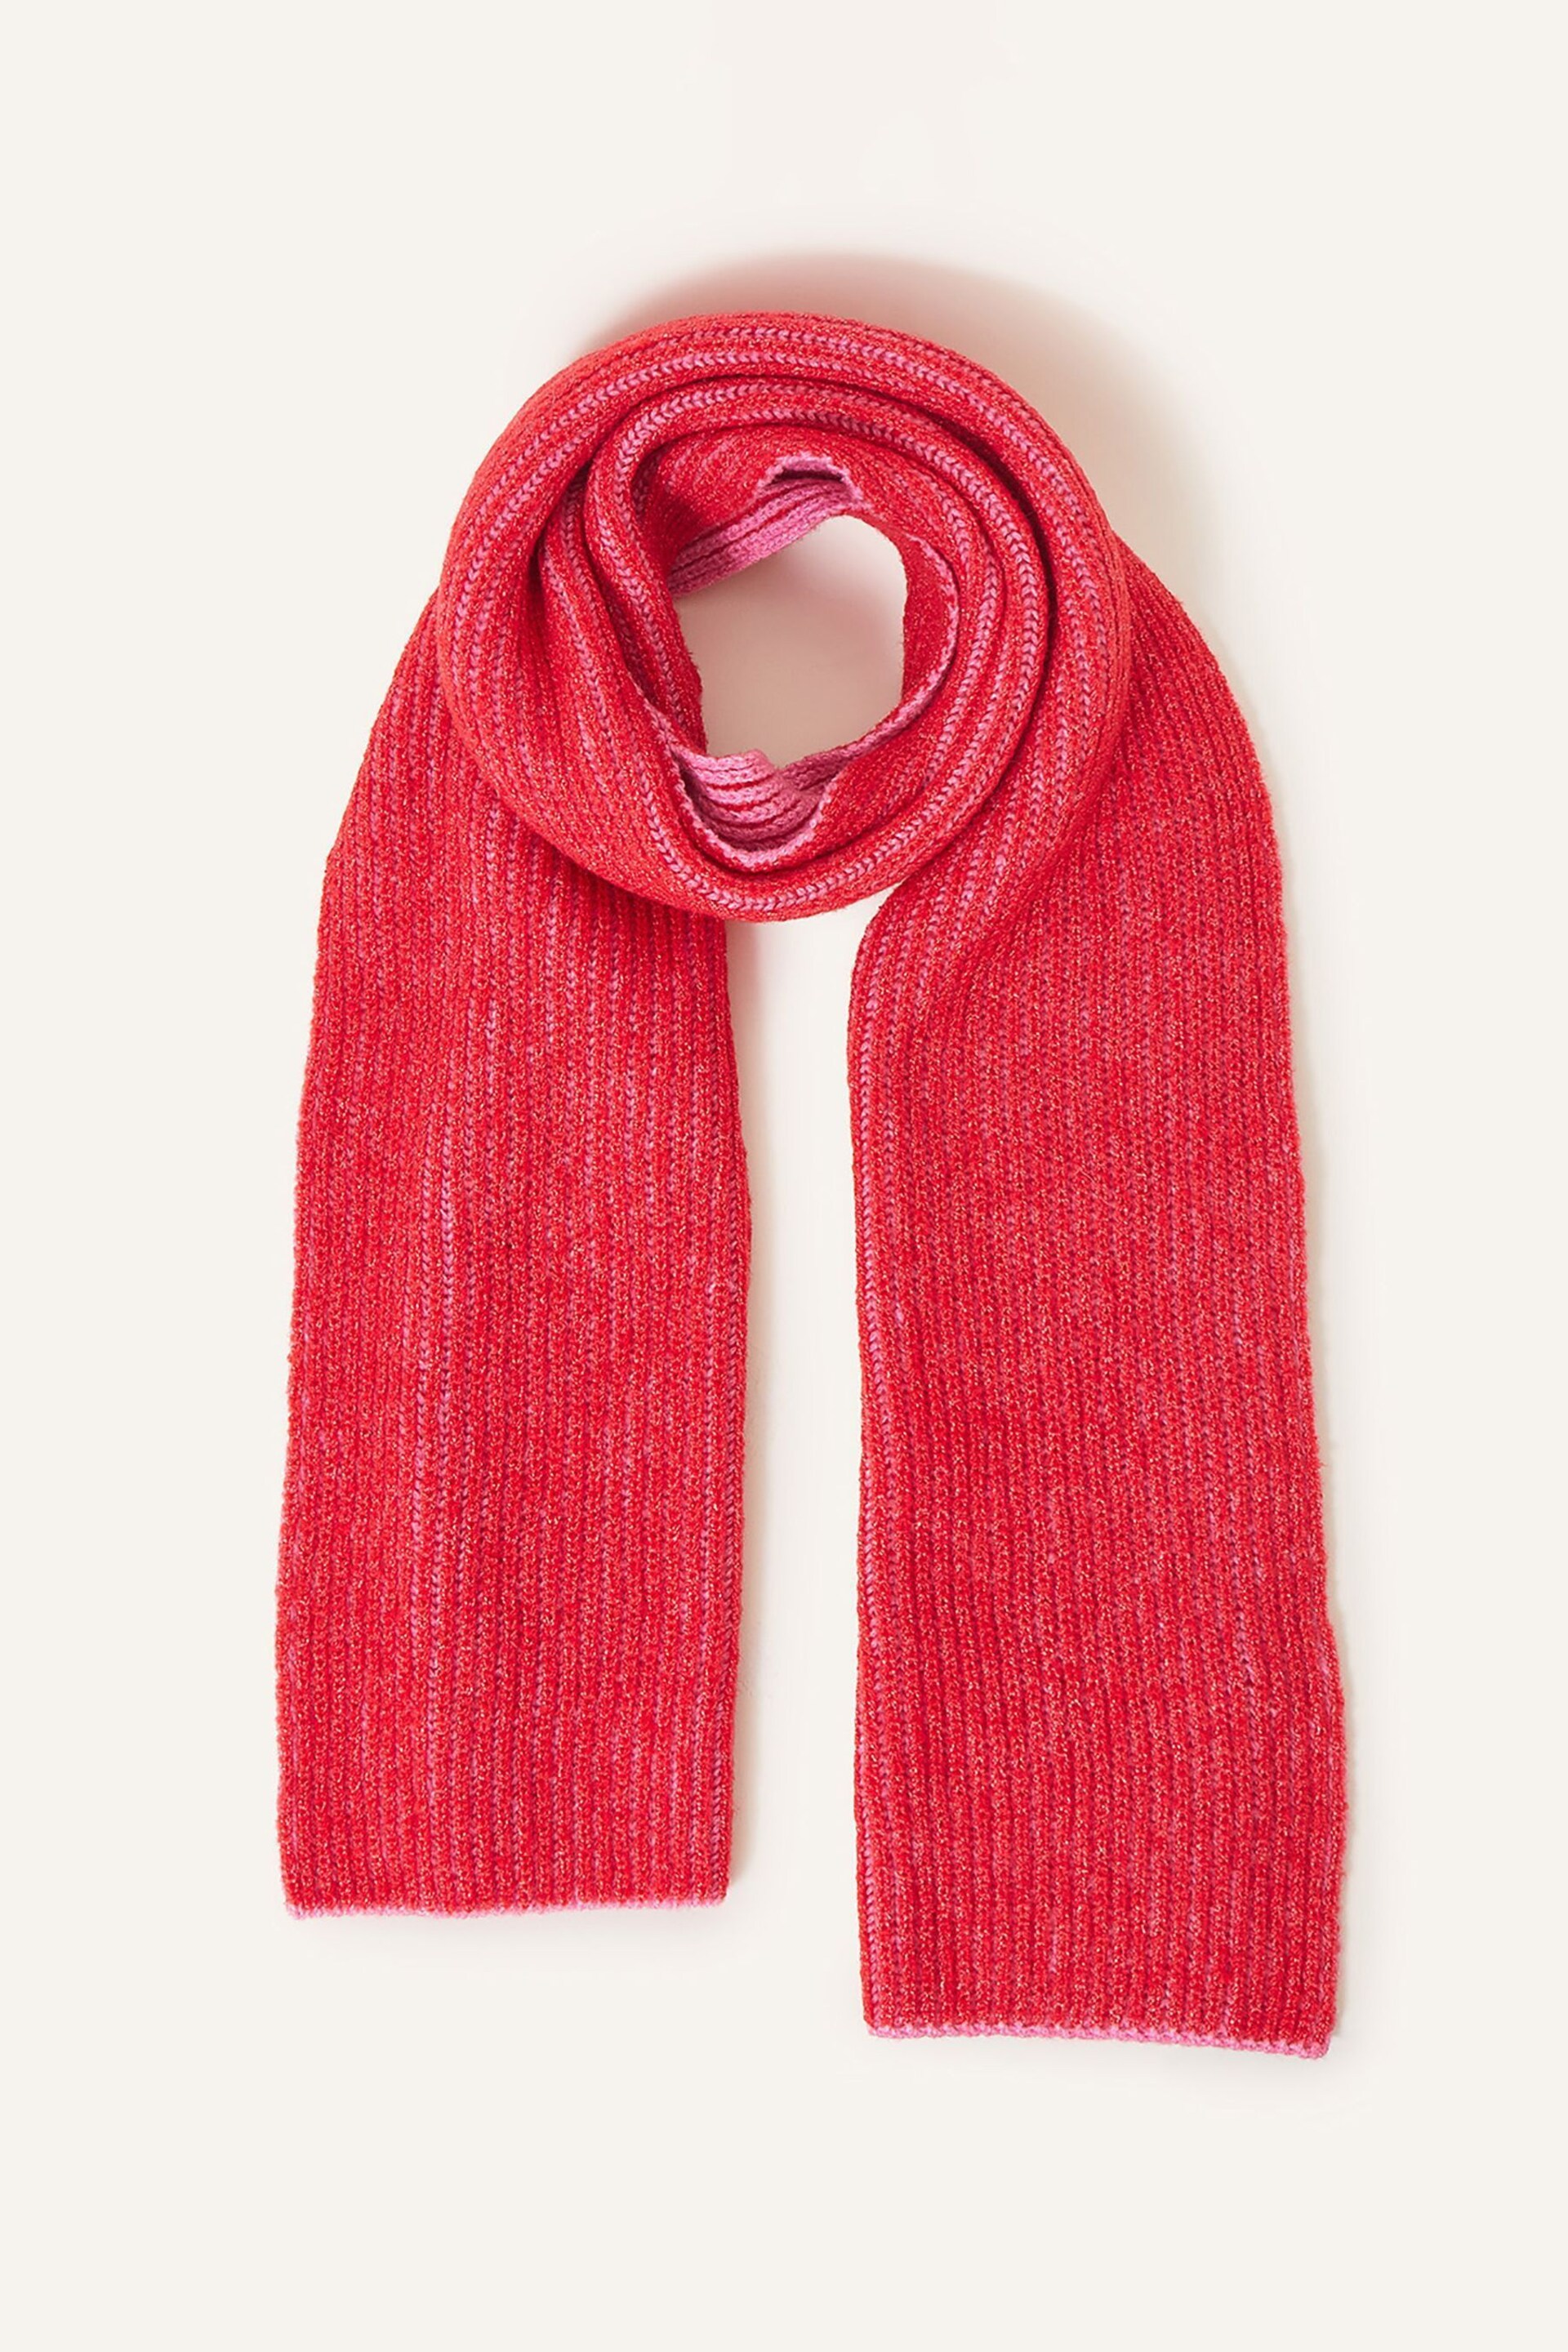 Accessorize Pink Paris Knit Scarf - Image 1 of 3